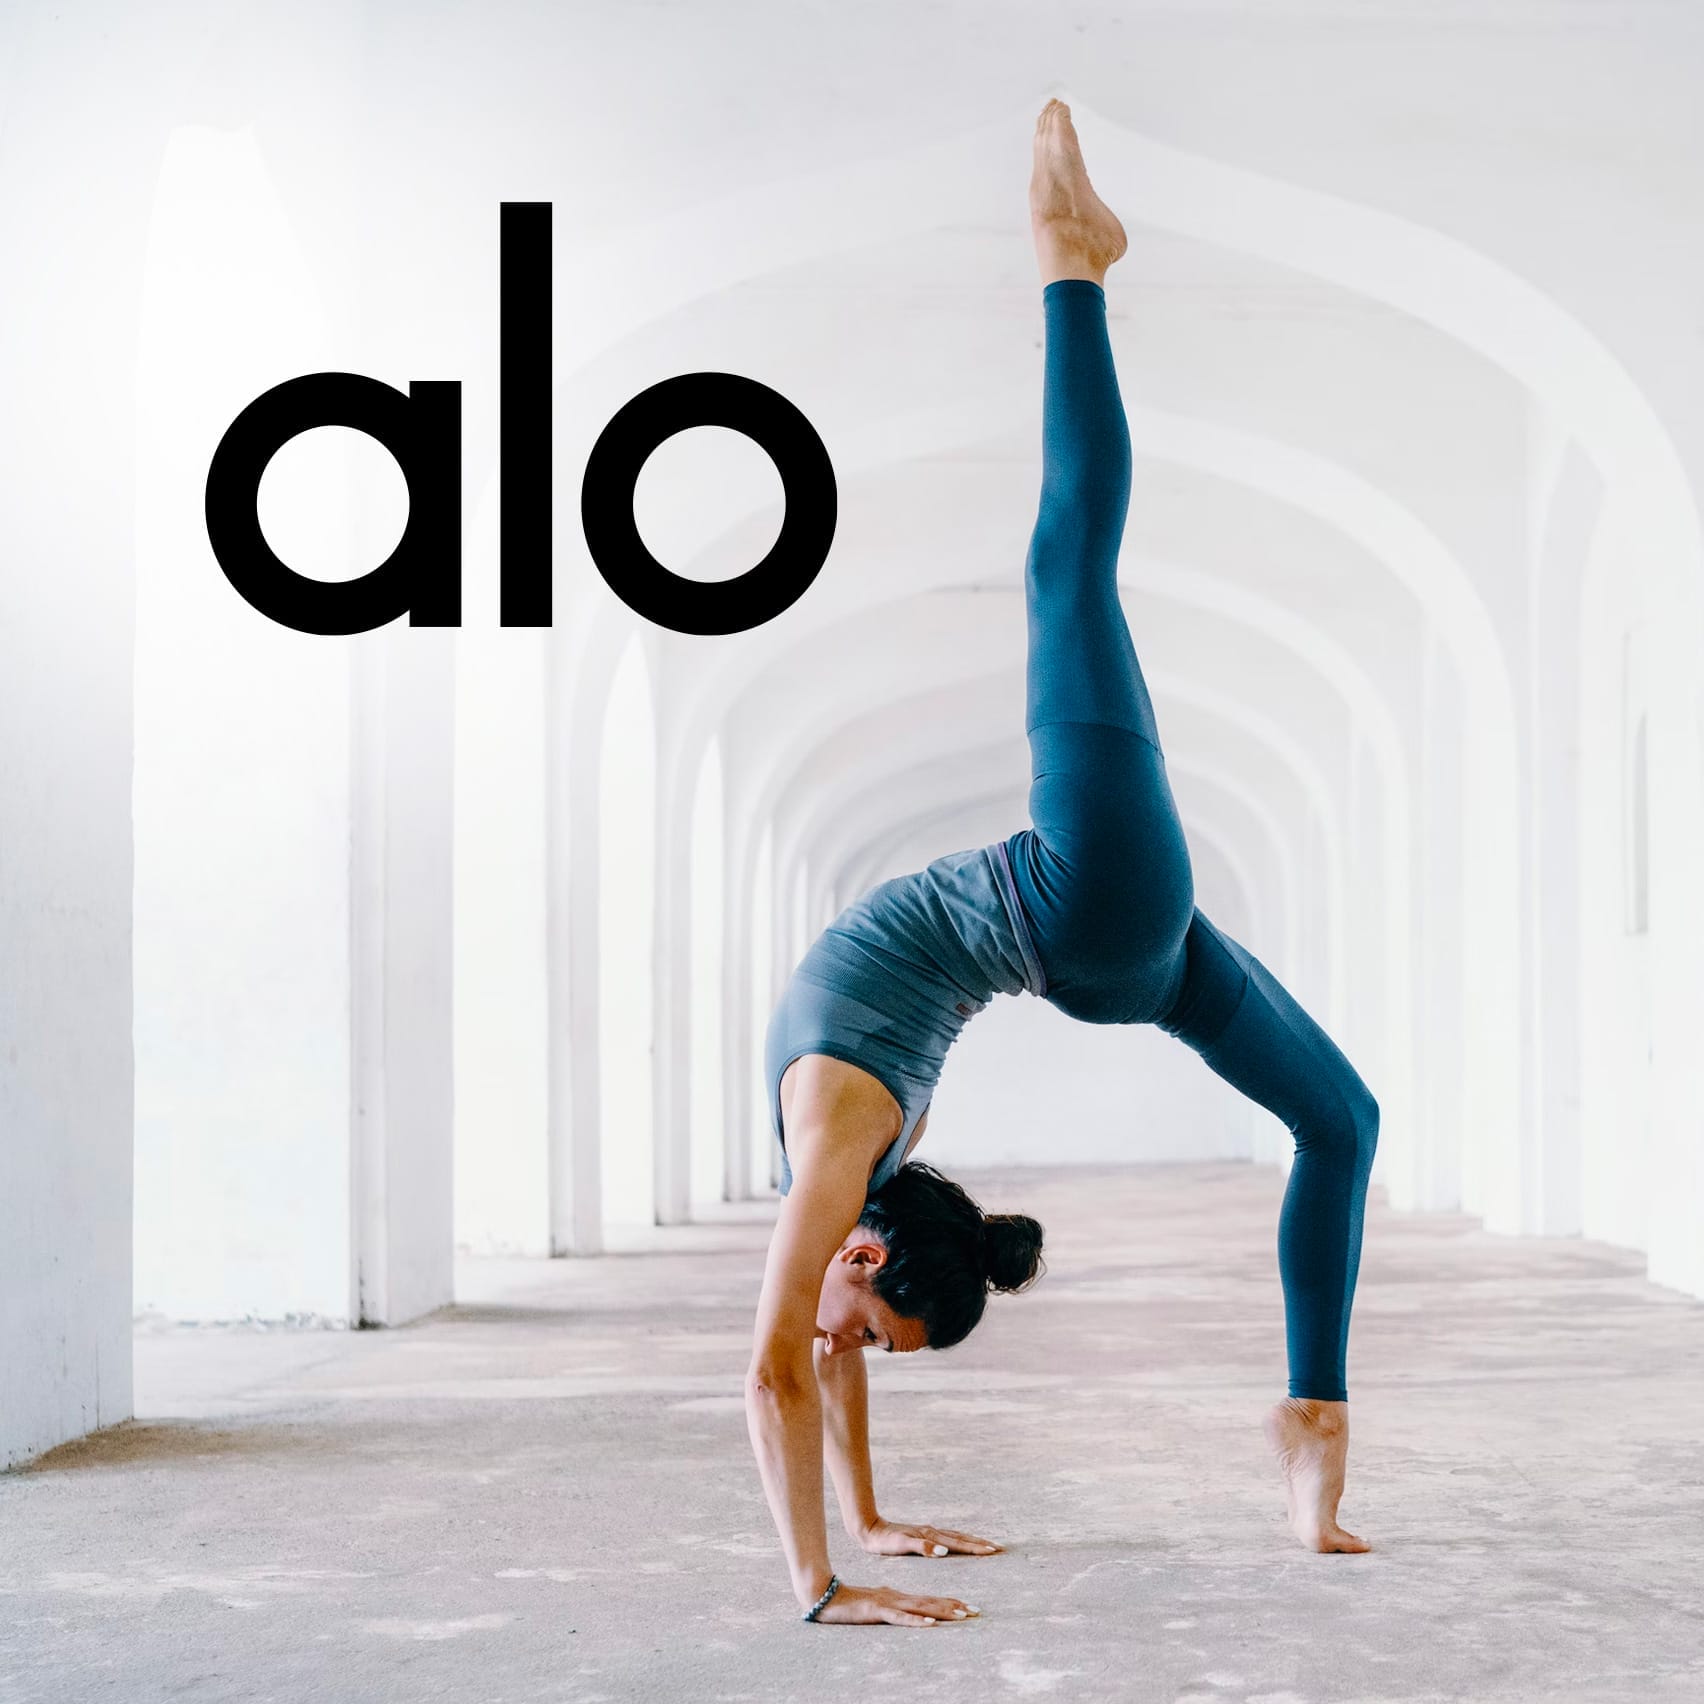 A woman doing Alo Yoga in an archway with the word ola.